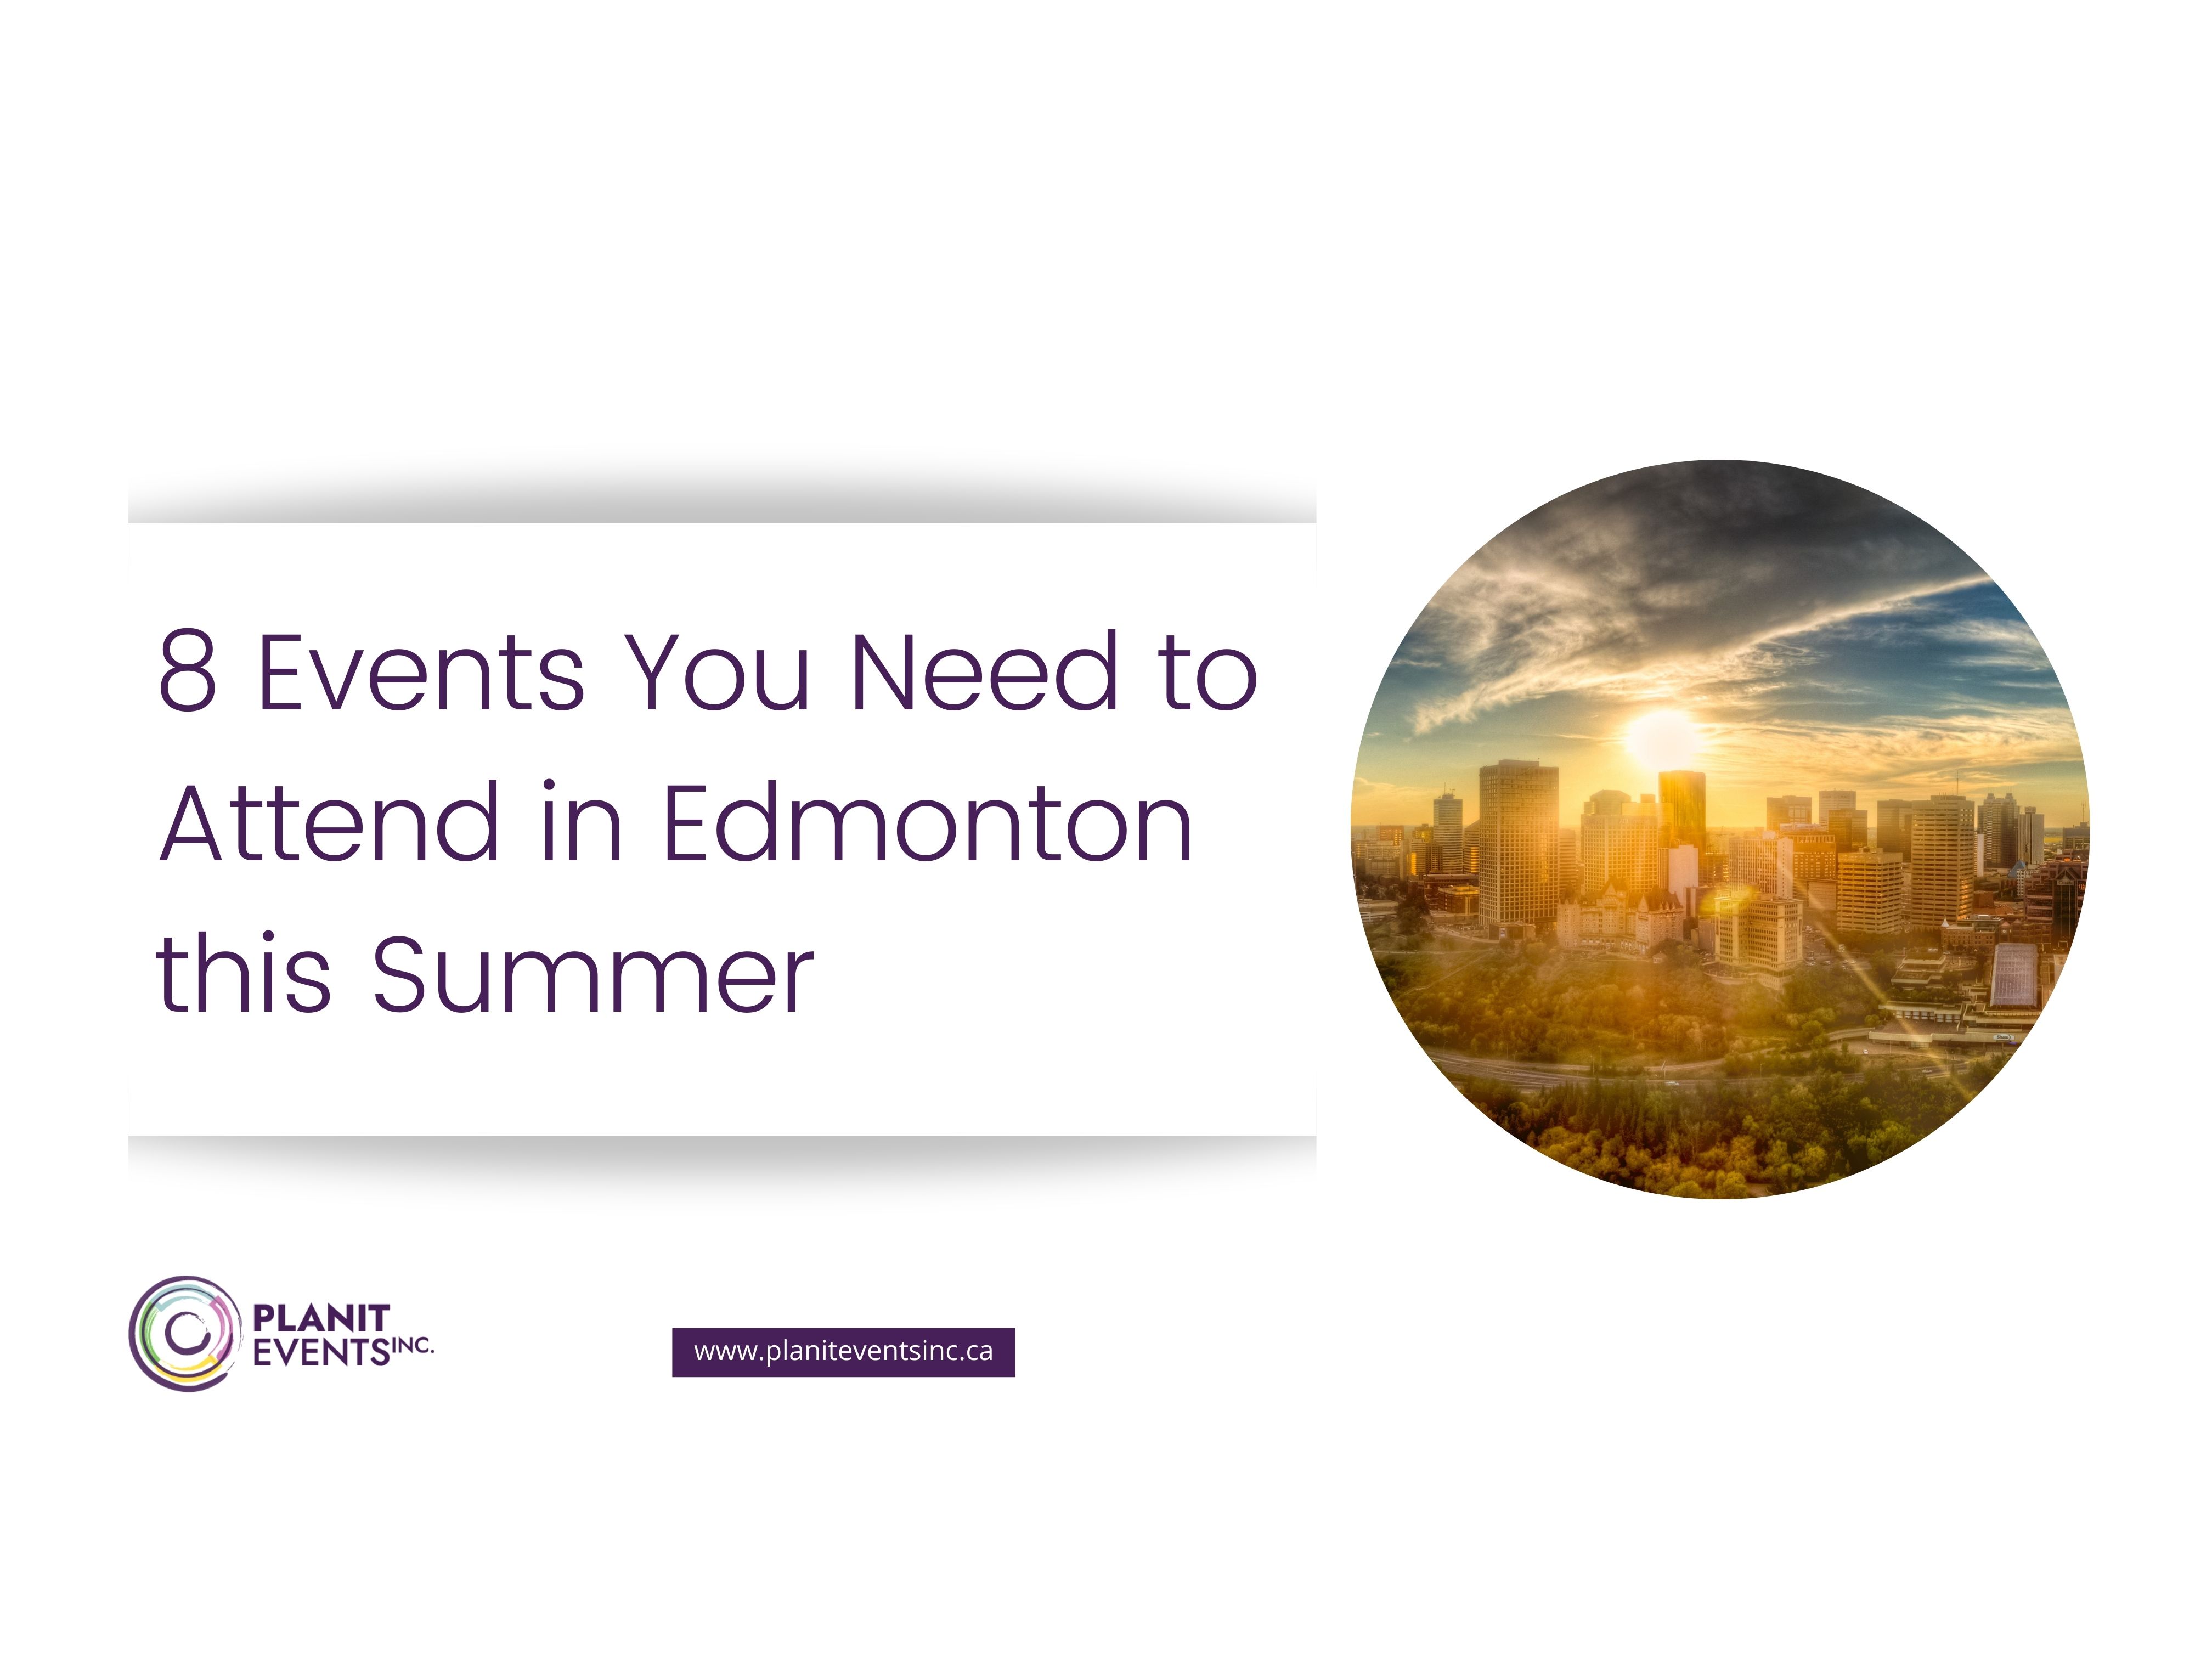 8 Events You Need to Attend in Edmonton this Summer